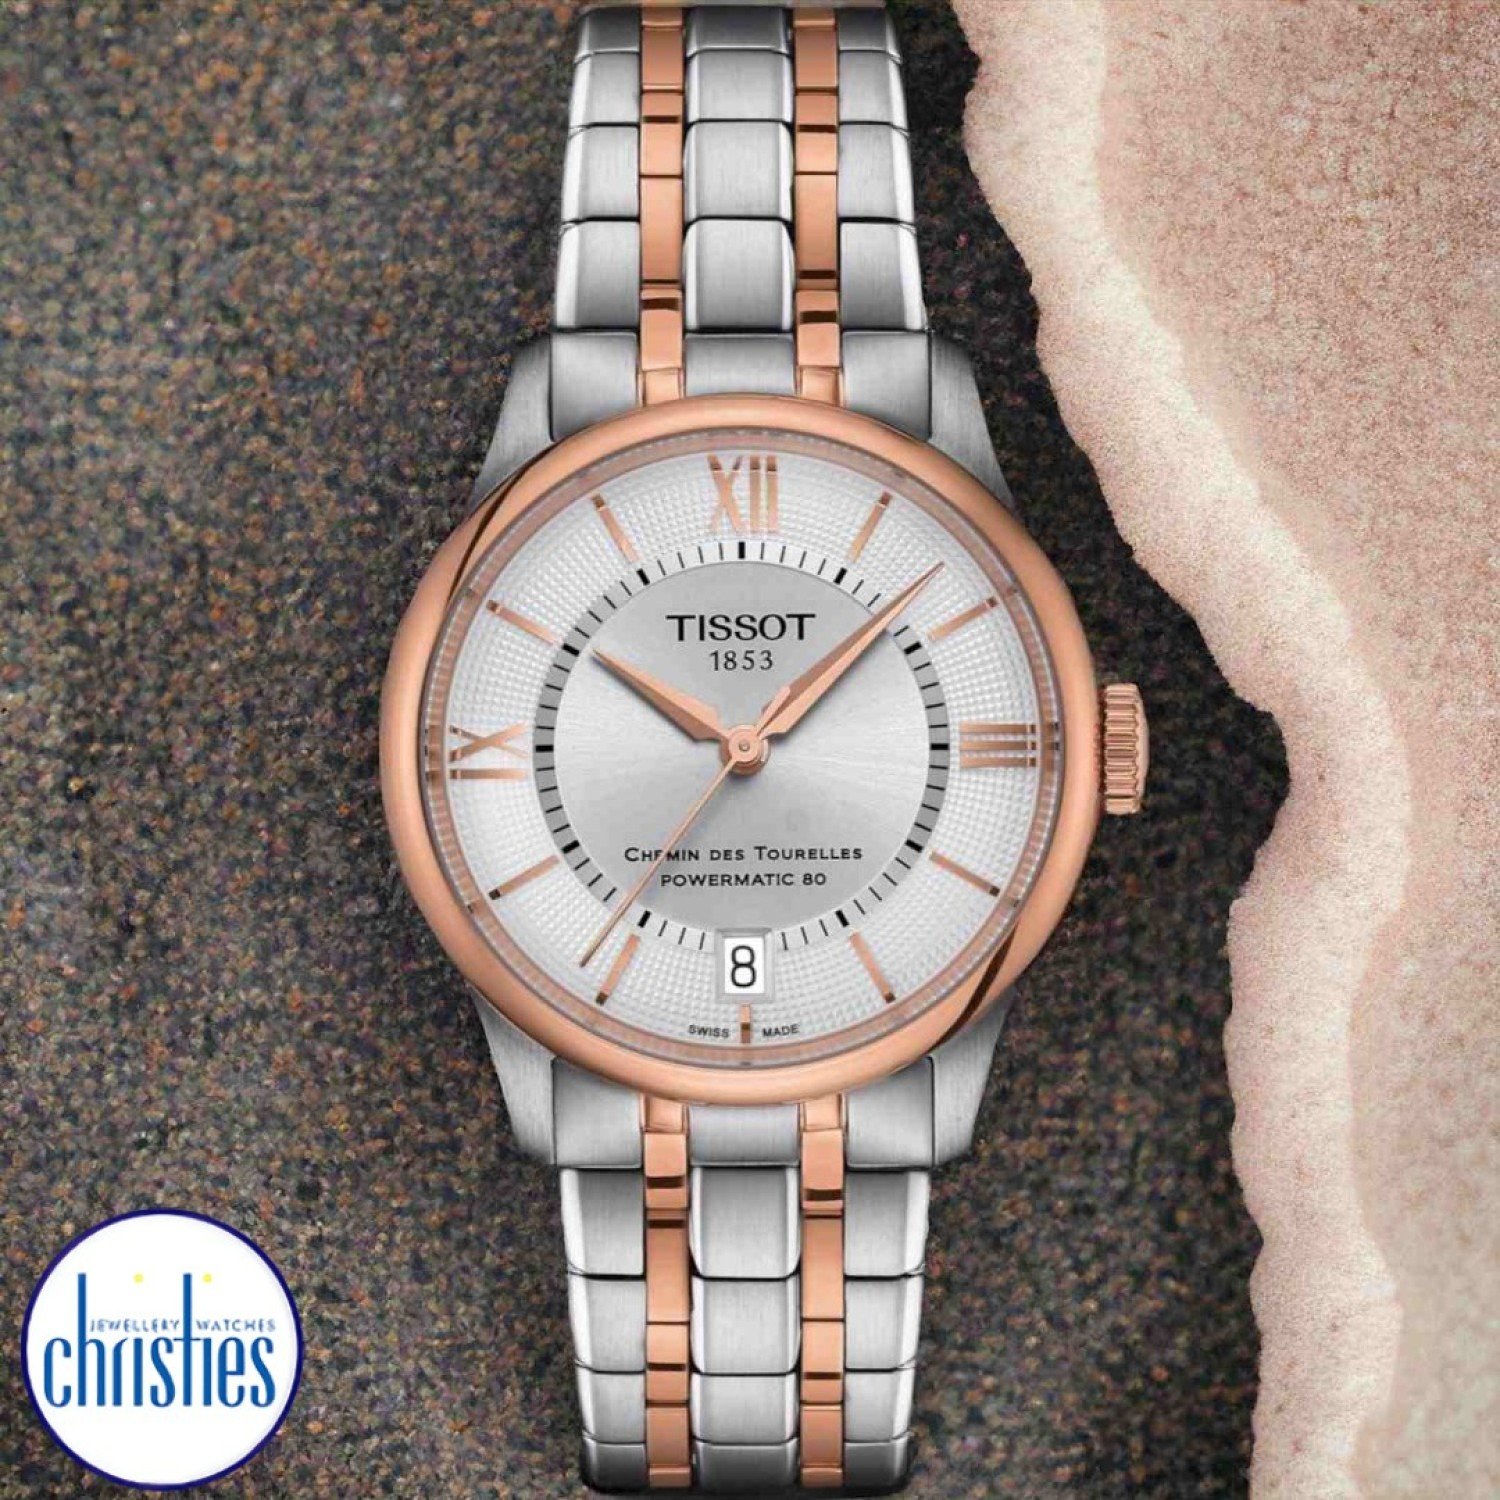 Tissot Chemin Des Tourelles Powermatic 80 34MM T1392072203800 T139.207.22.038.00 Tissot Watches NZ | Order now for Fast Free Delivery and 7 Day NZ support online and Instore at our Auckland Stores.